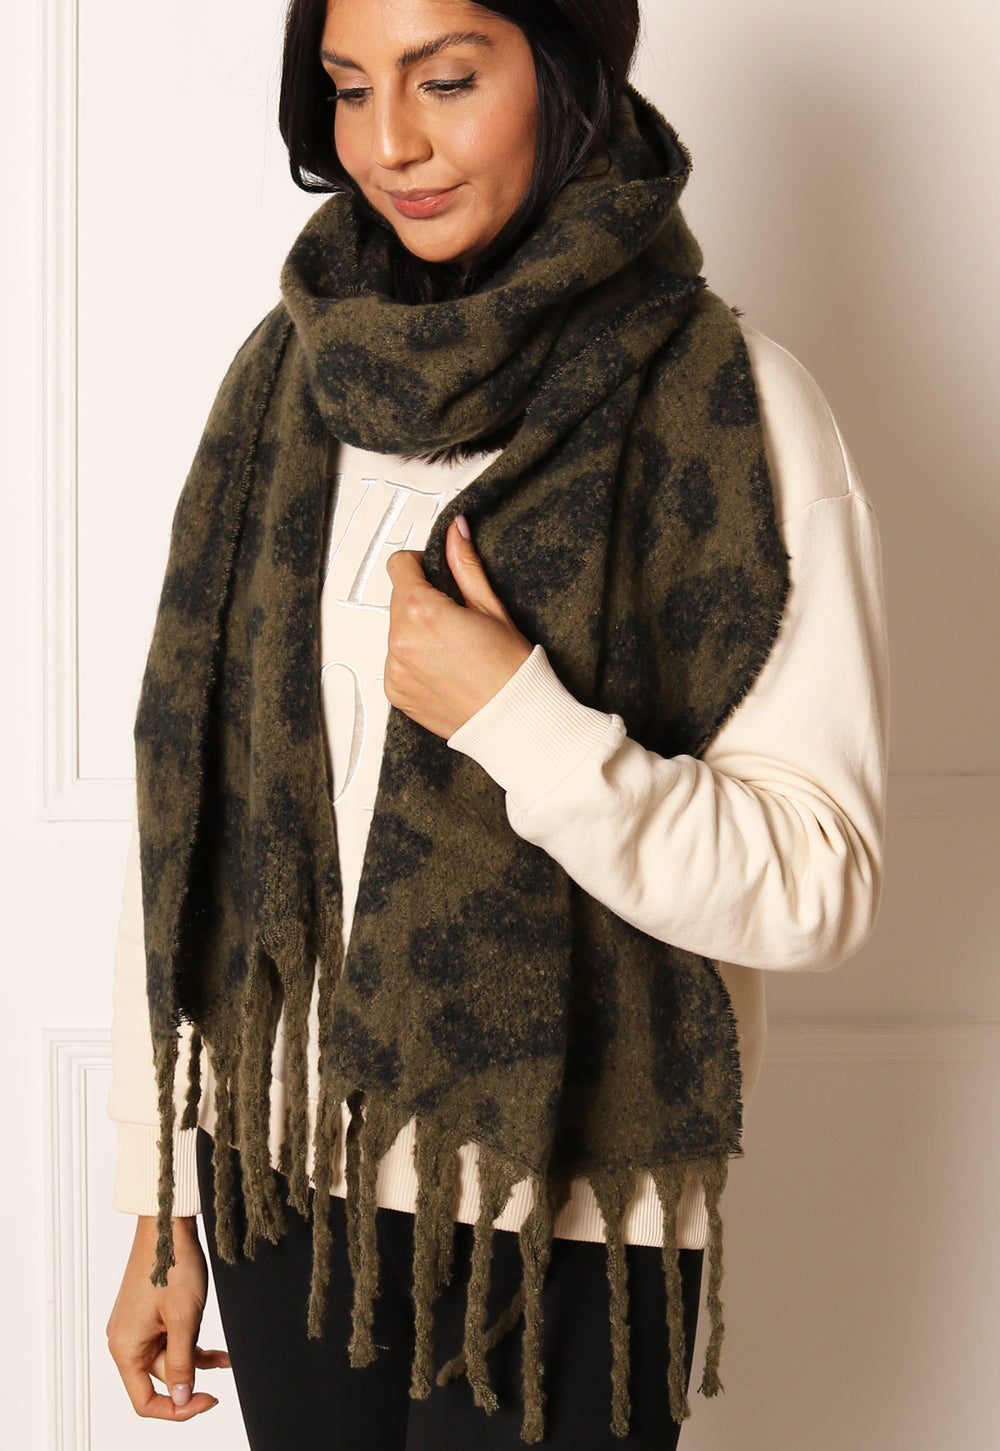 ONLY Leopard Print Oversized Brushed Scarf with Tassels in Khaki & Black - One Nation Clothing